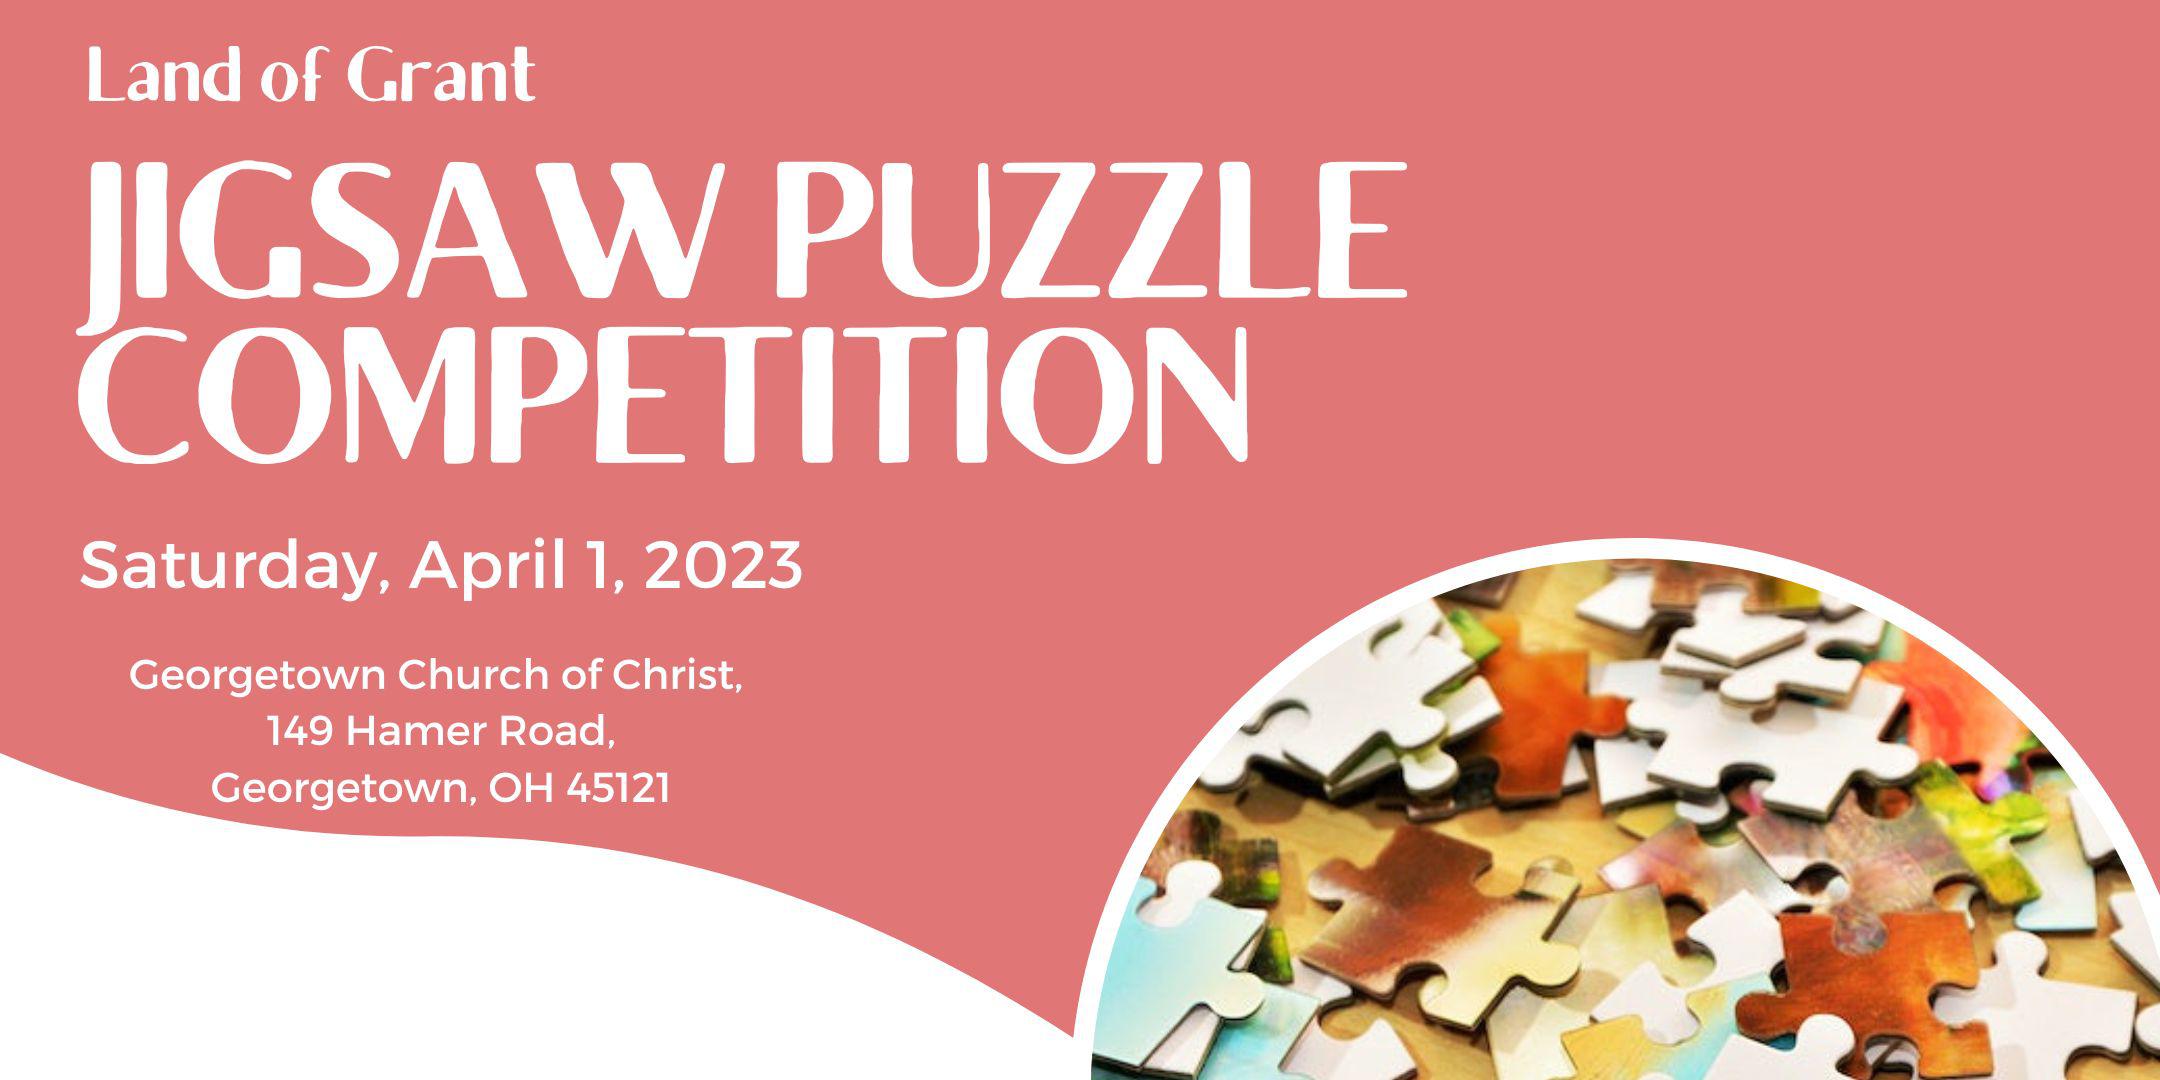 Land of Grant Jigsaw Puzzle Competition Tickets, Sat, Apr 1, 2023 at 8